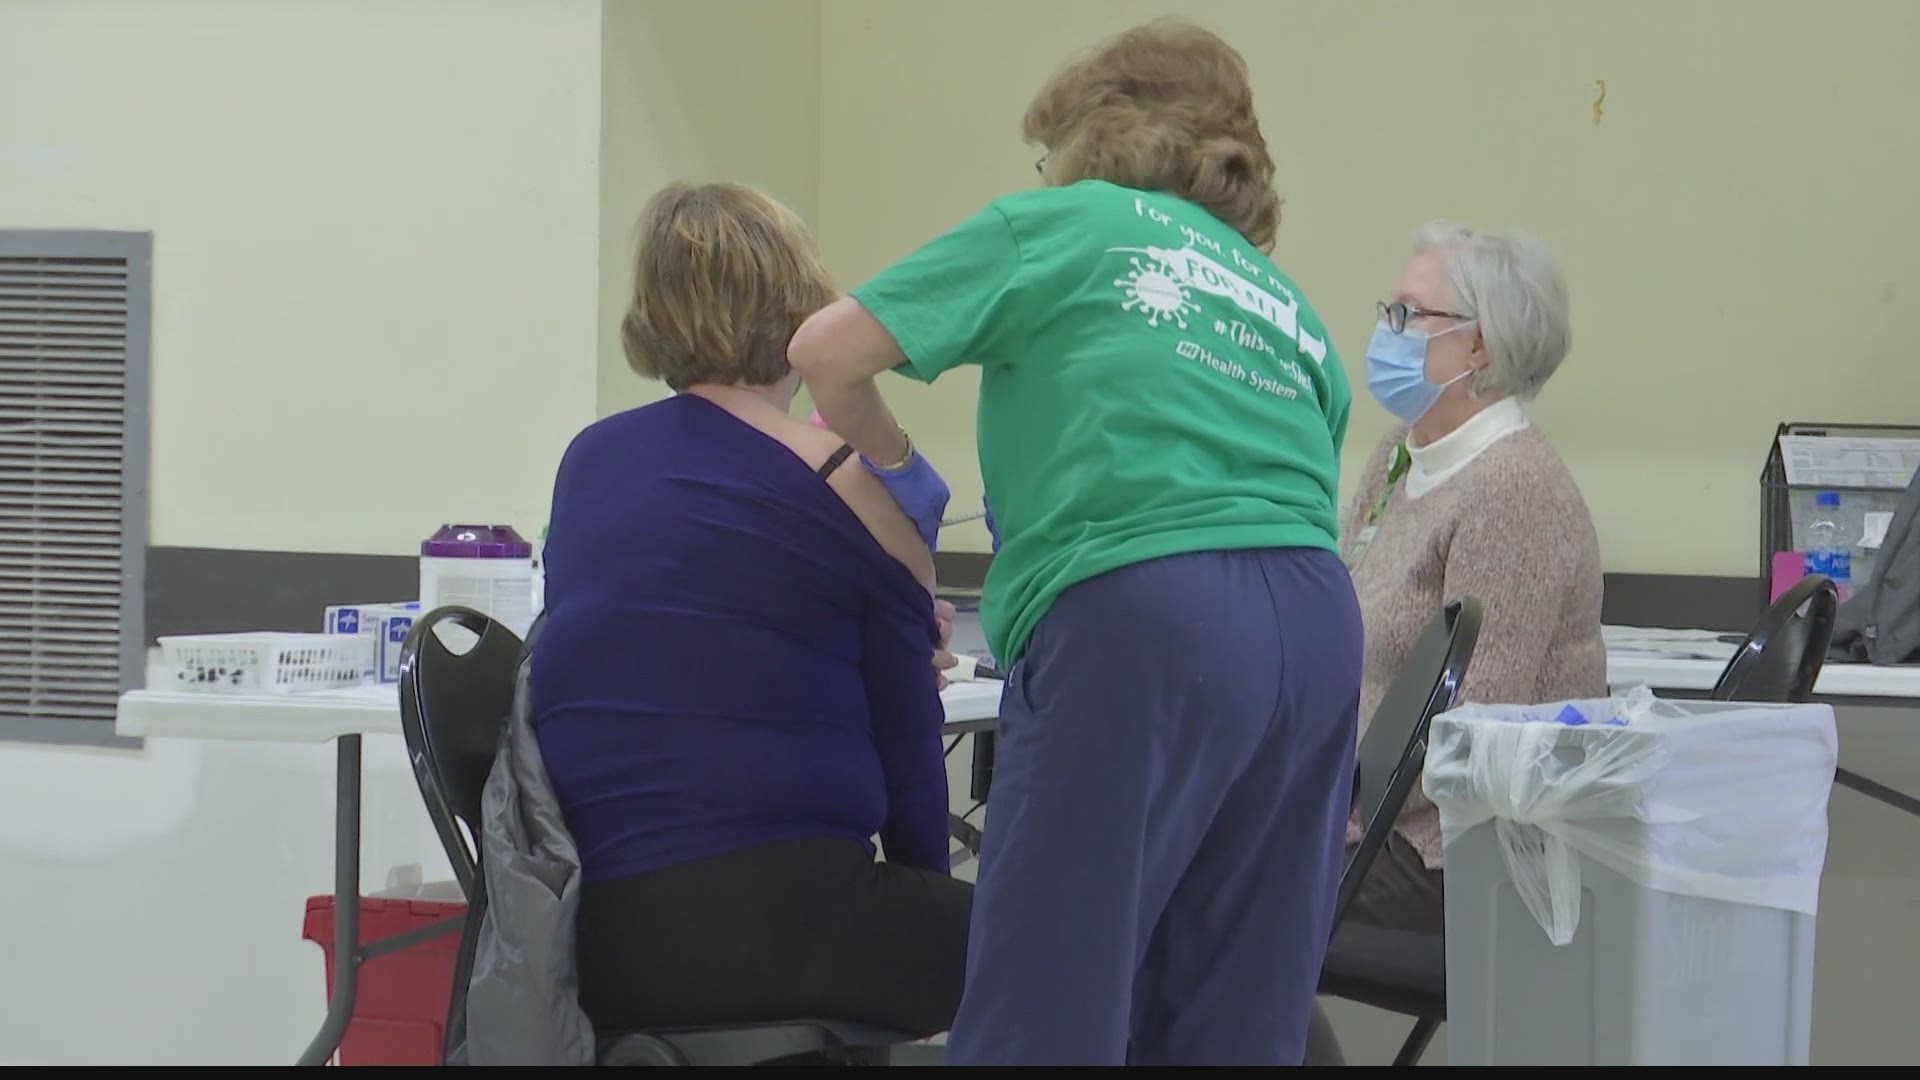 Huntsville Hospital officials say 1,000 of the people vaccinated on Monday are part of a mass vaccination effort from Feb. 8-12.